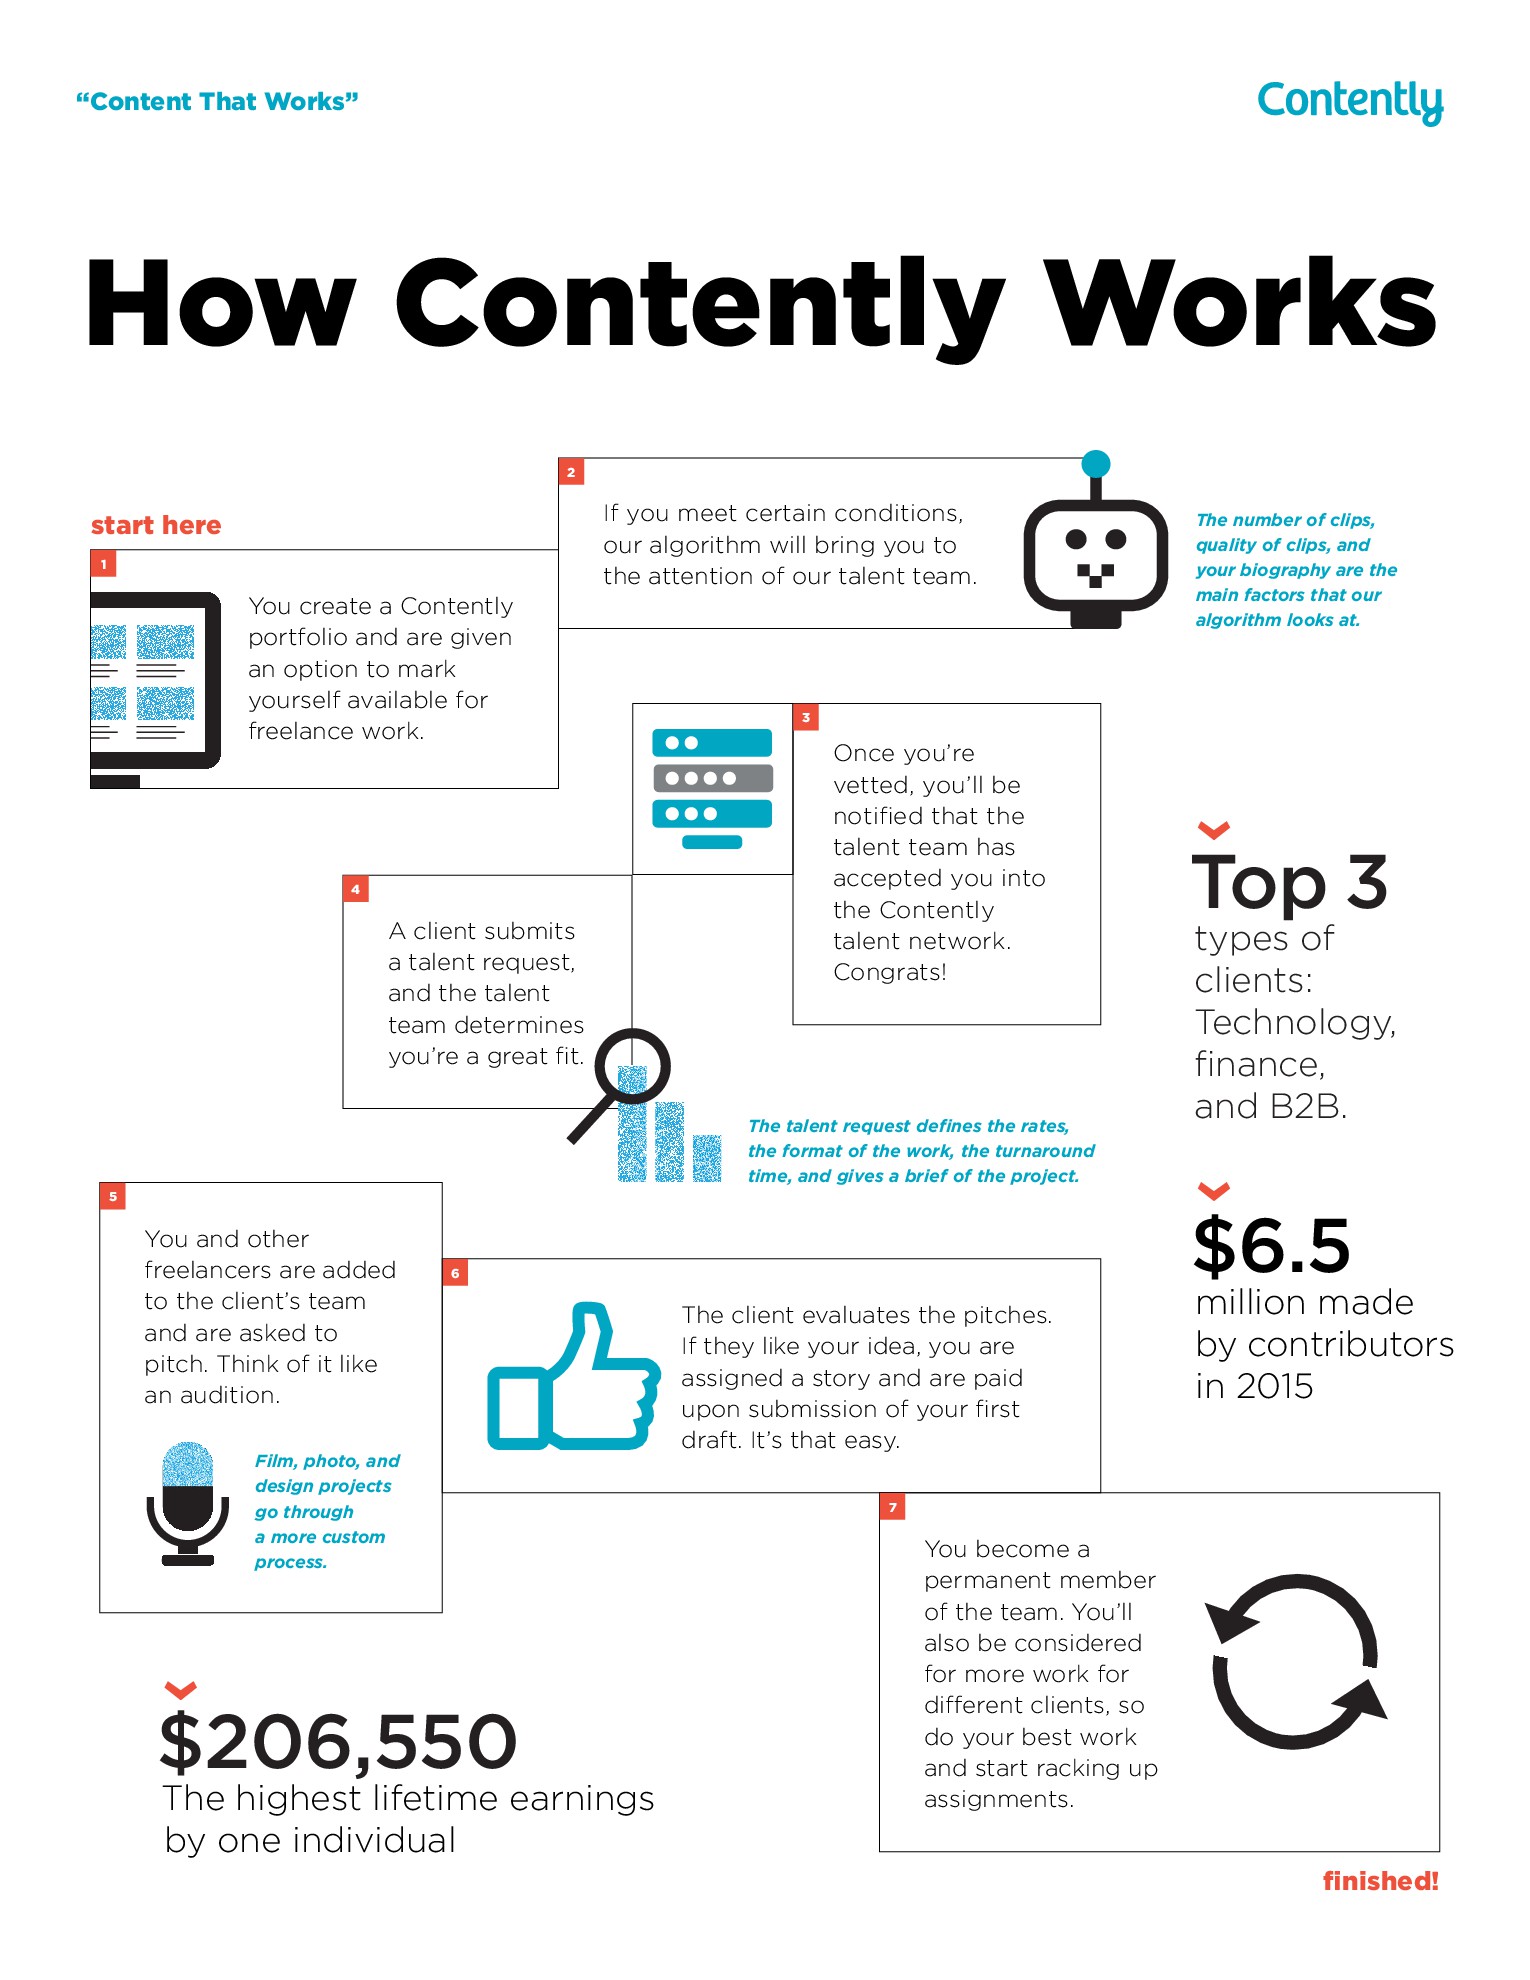 How Contently Works for Freelancers